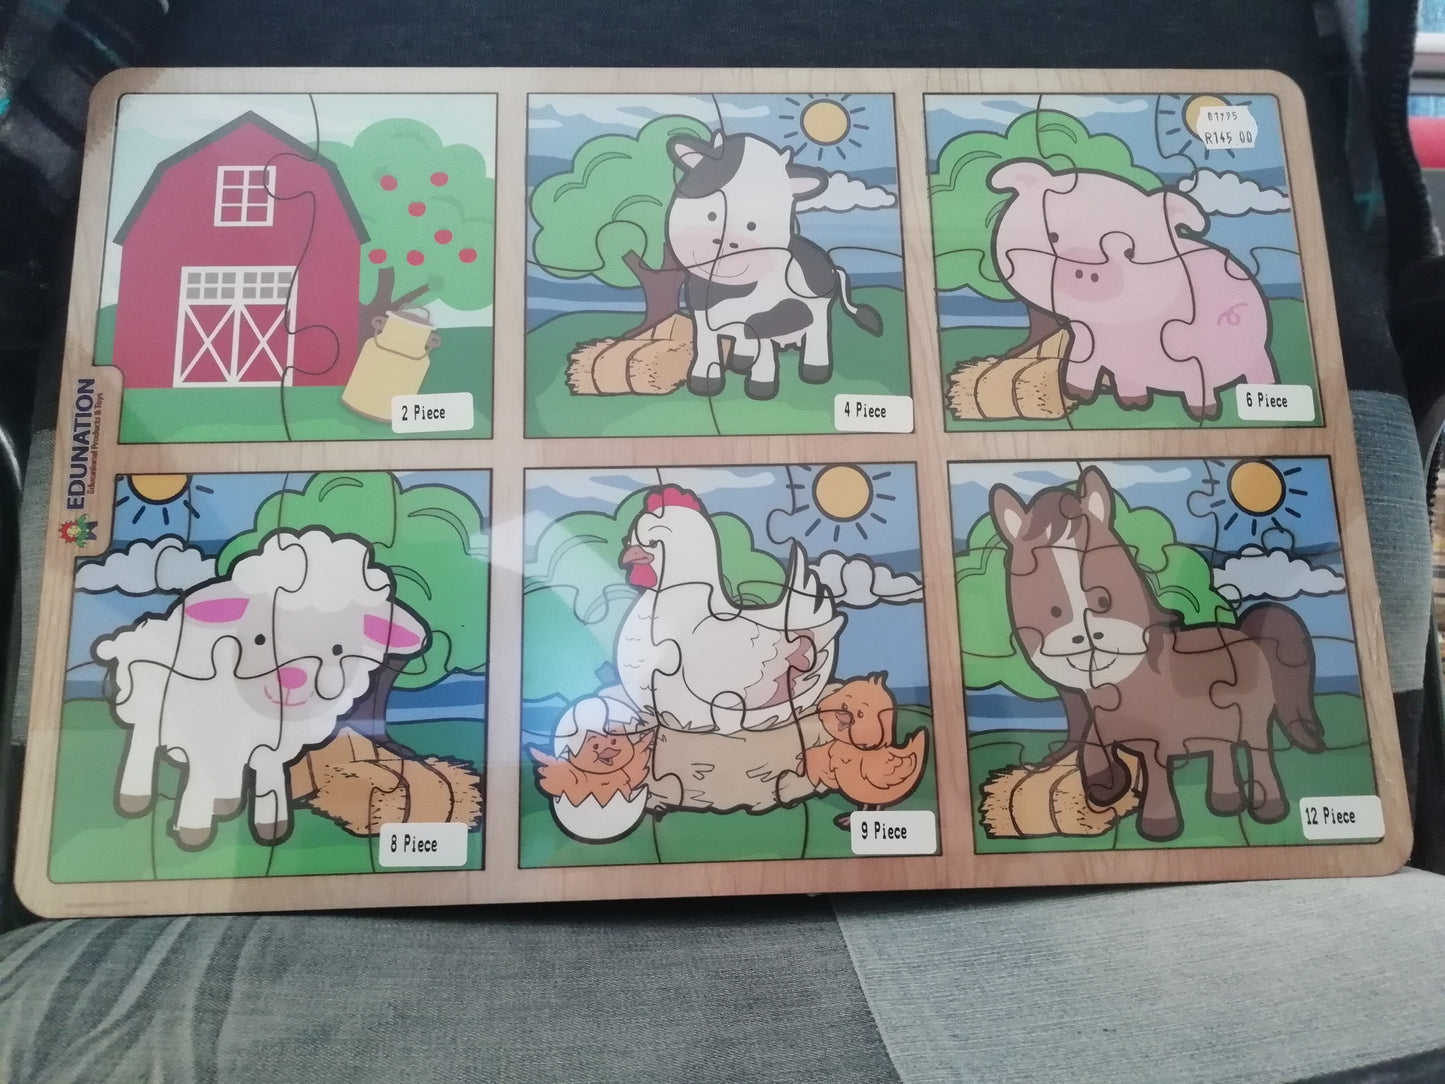 Puzzle Toddler - Farm Combo with 6 puzzles Edunation South Africa A3 Frame Puzzles